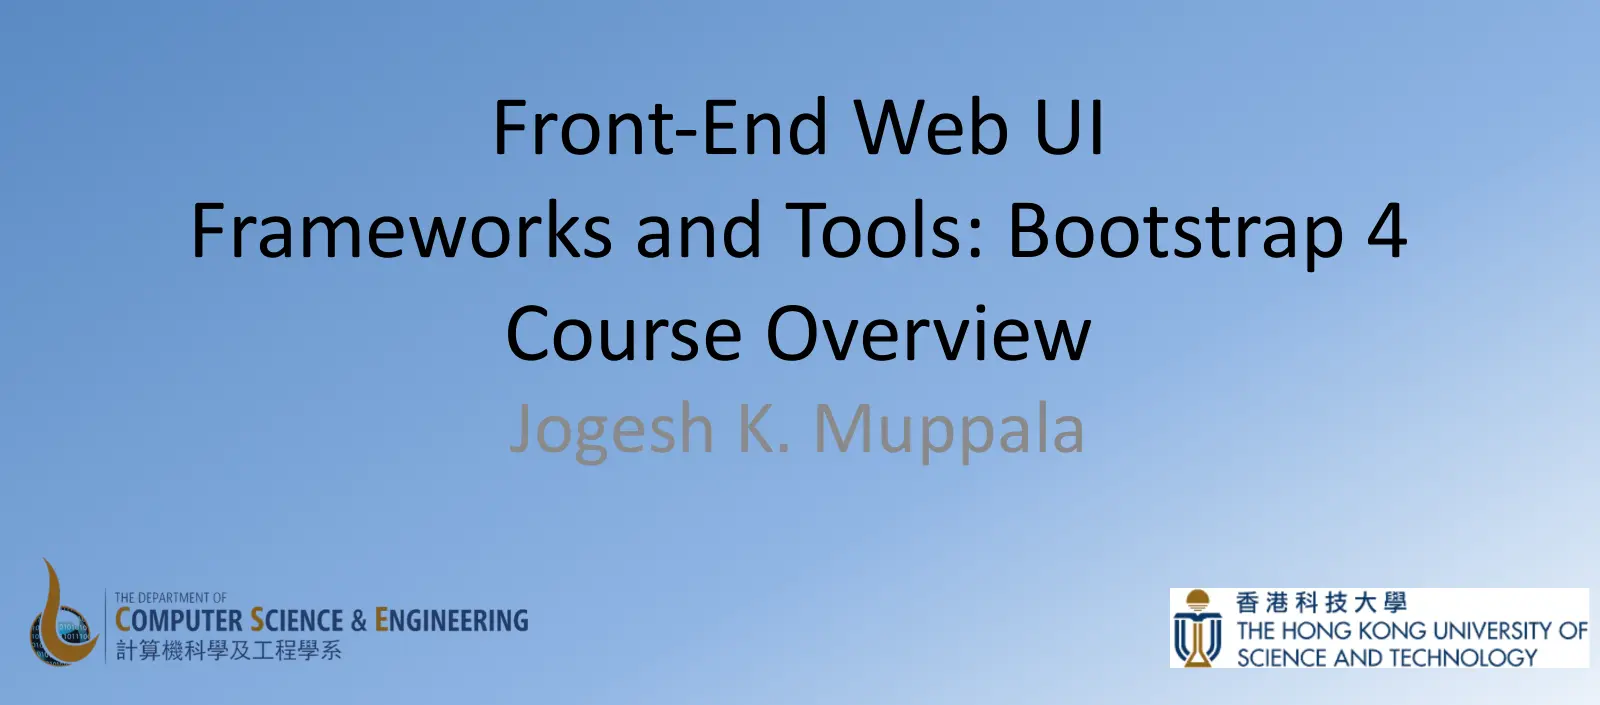 Course title: Front-End Web UI Frameworks and Tools: Bootstrap 4.